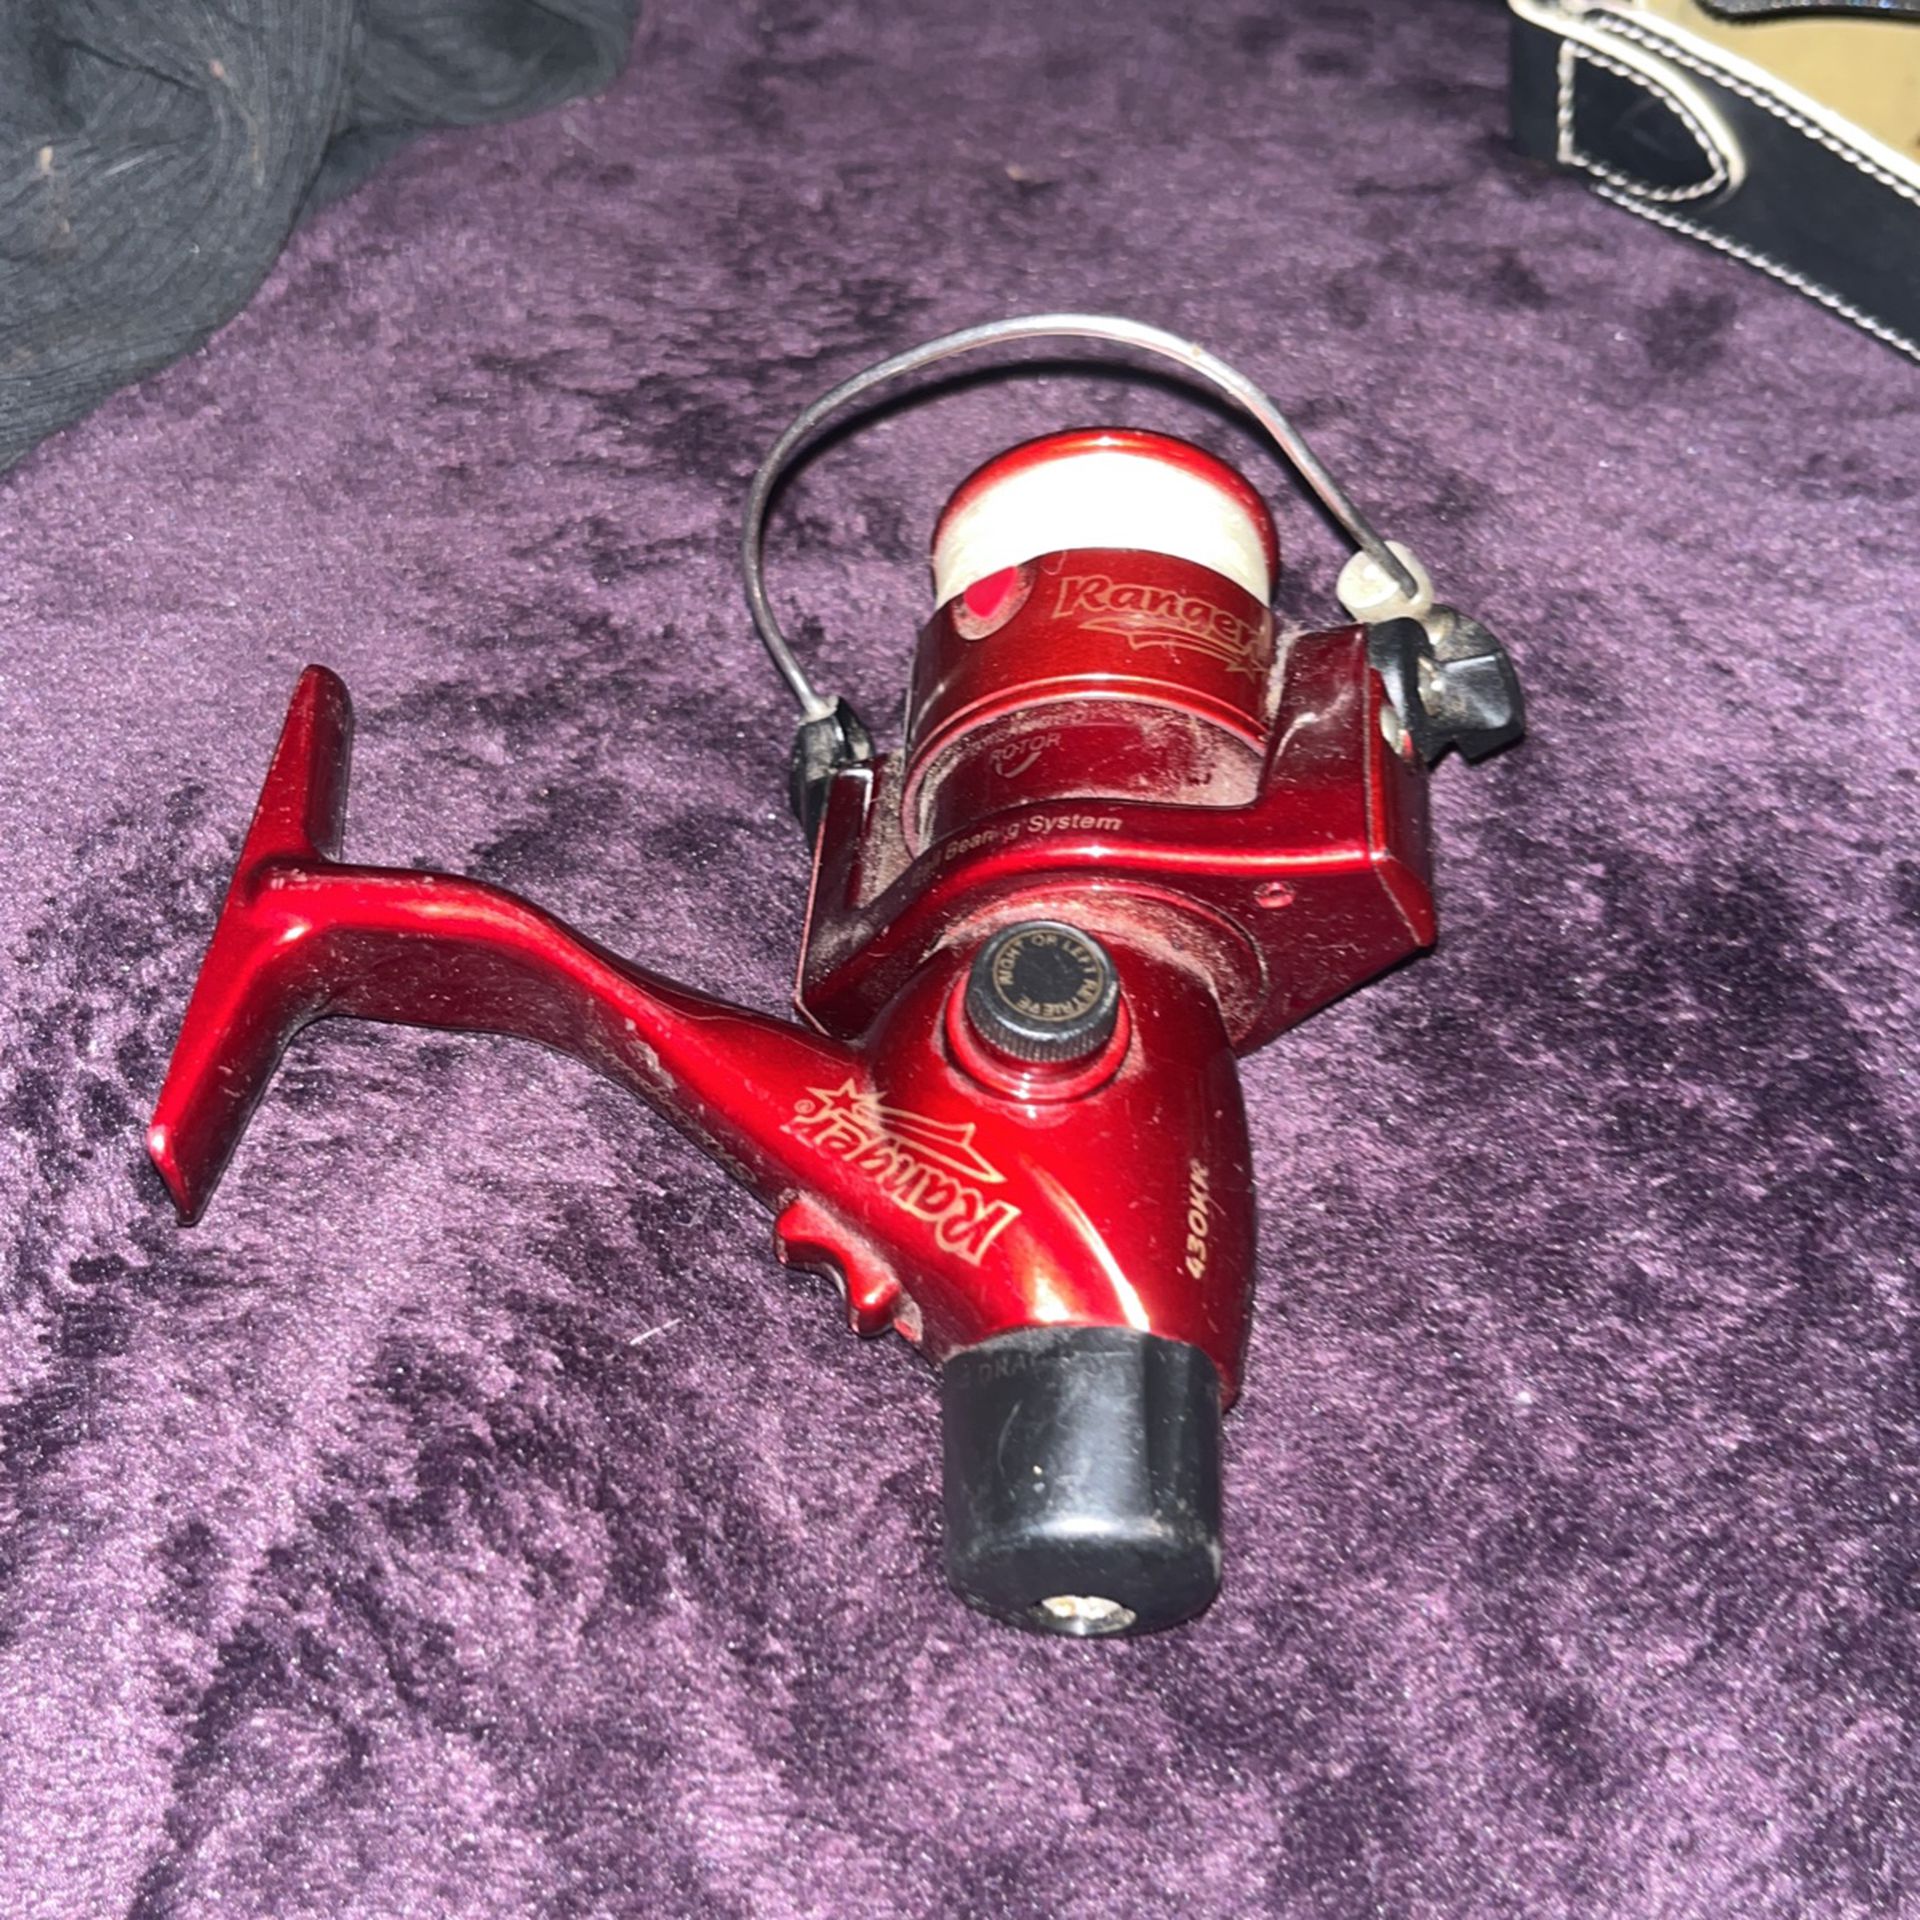 Shakespeare Ranger Spinning Fishing Reel 430KR NEW SHAKESPEARE RANGER SPINNING  Fishing Reel 430KR NEW - $ for Sale in San Diego, CA - OfferUp